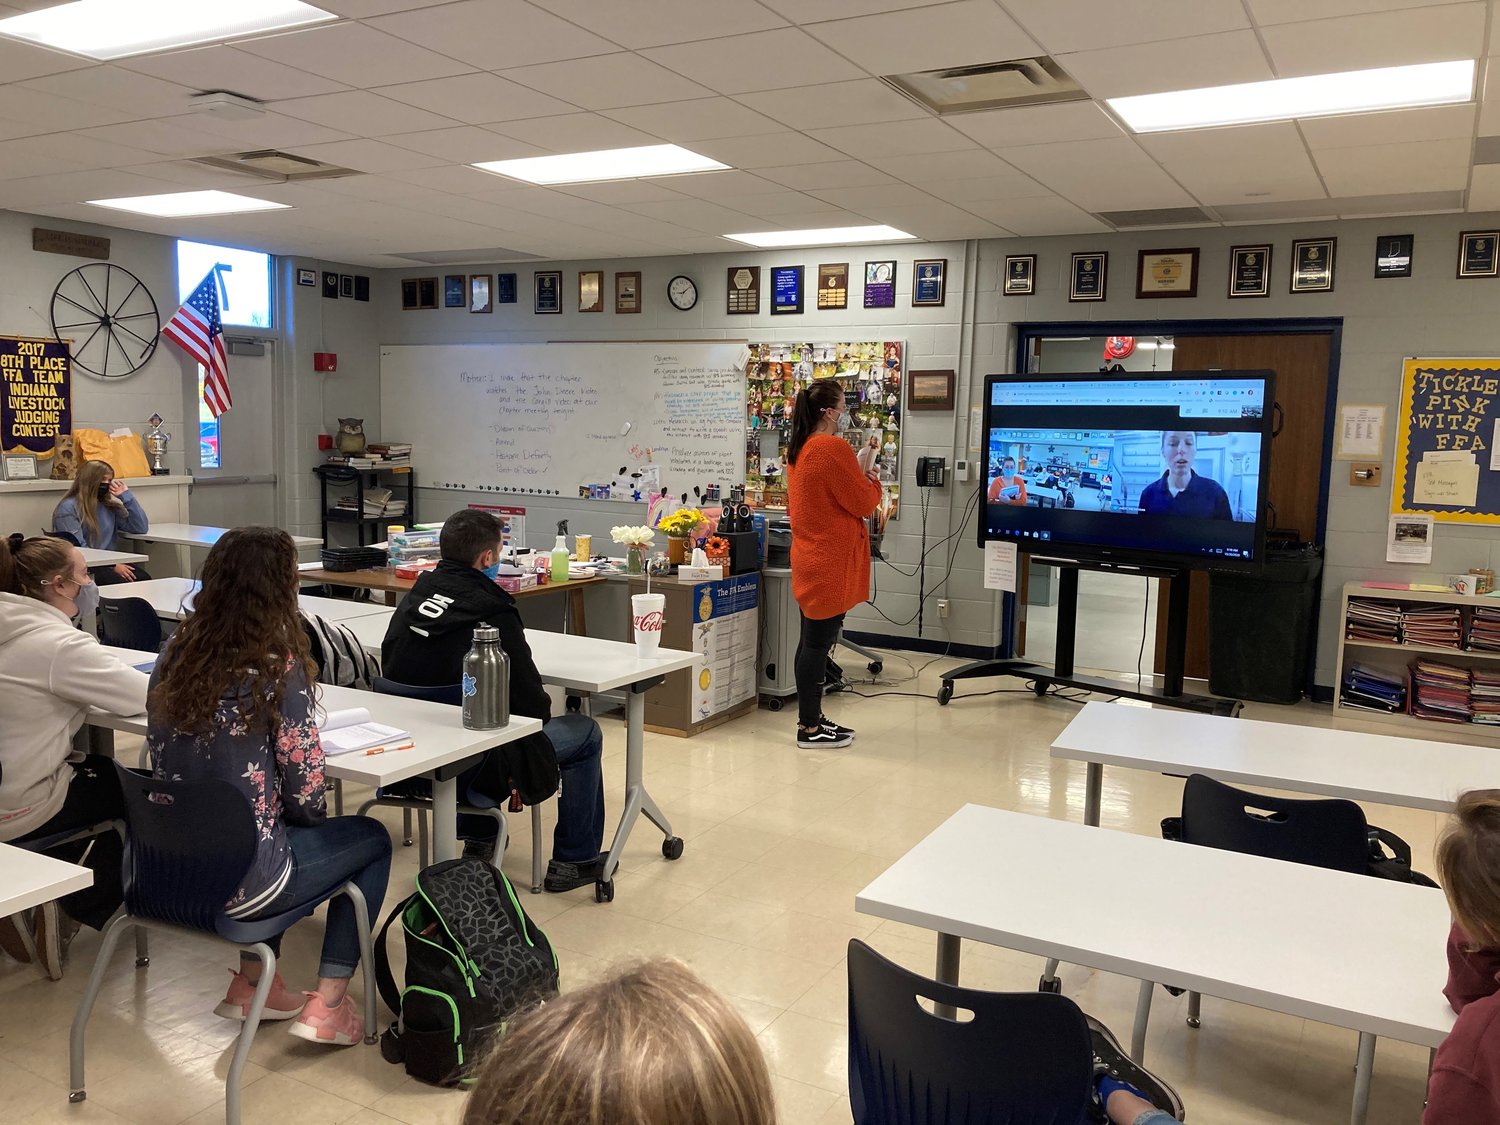 The students from Nancy Bell’s animal science class at North Montgomery Community Schools recently completed their swine unit, and to provide students the opportunity to see what swine production looks like in real life, AMVC public relations coordinator, Alicia Humphrey, was invited to give the students a virtual sow farm tour.